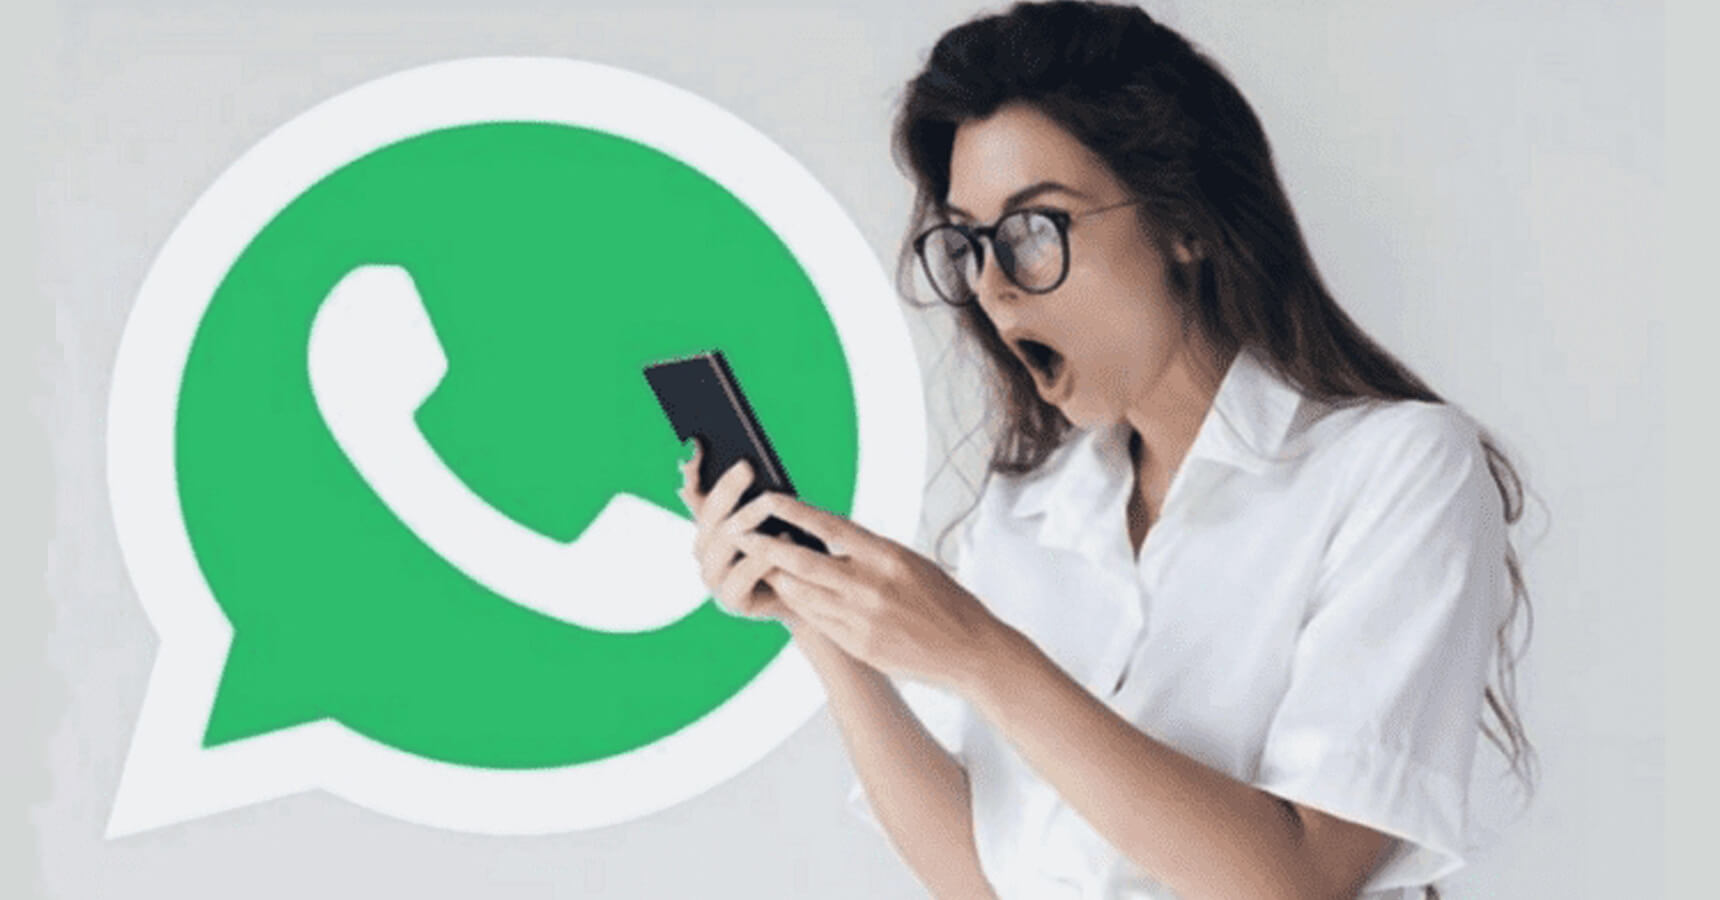 WhatsApp Upcoming Feature allow edit sent messages